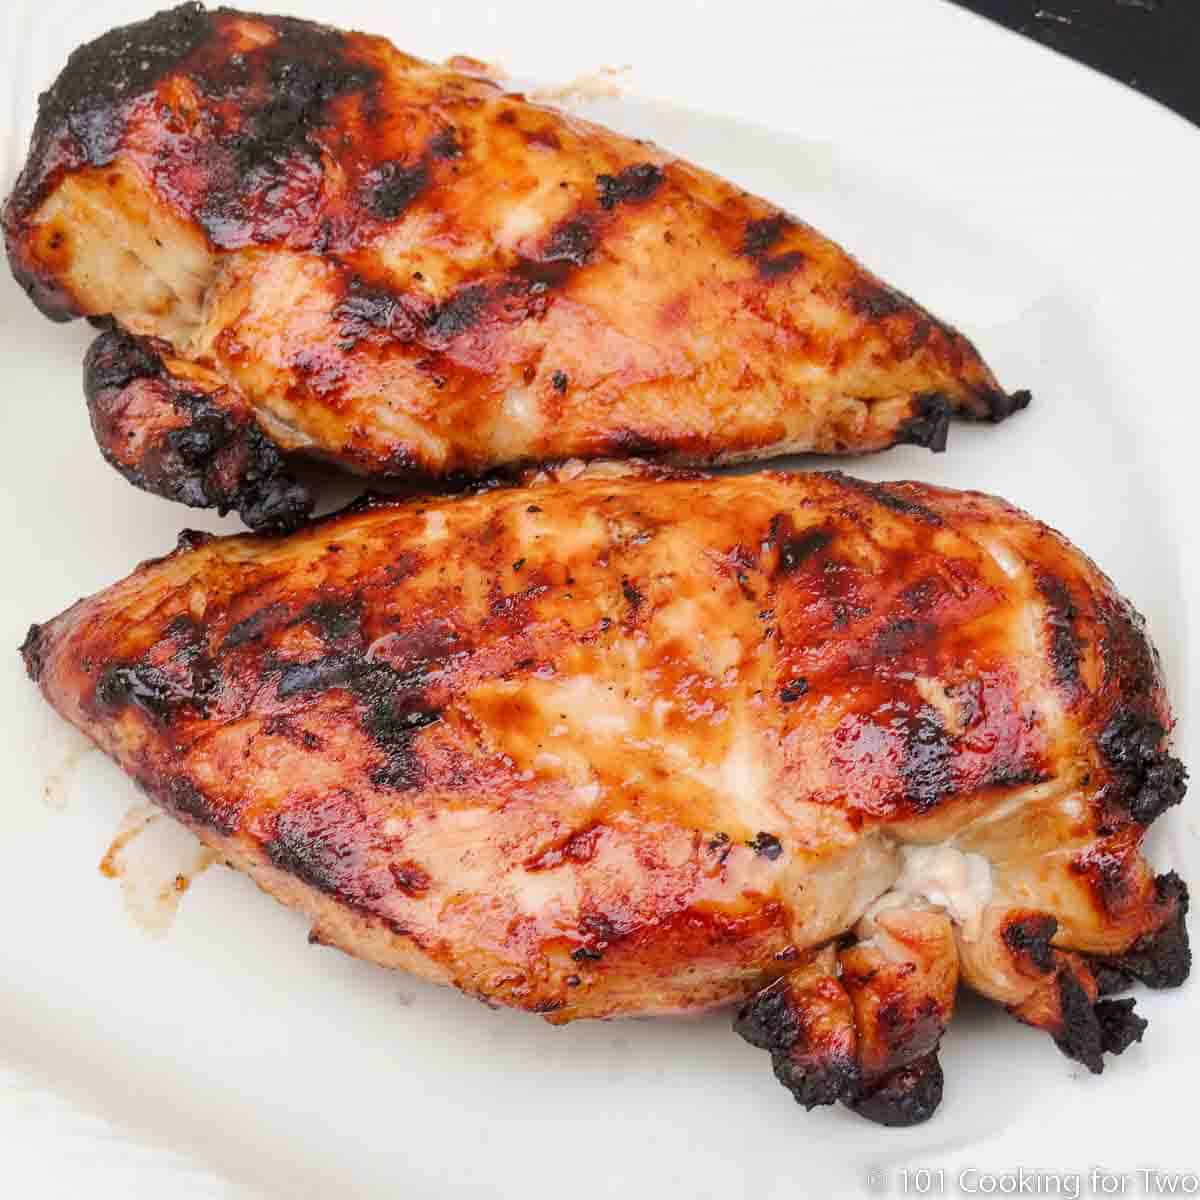 Two BBQ chicken breasts on white plate.